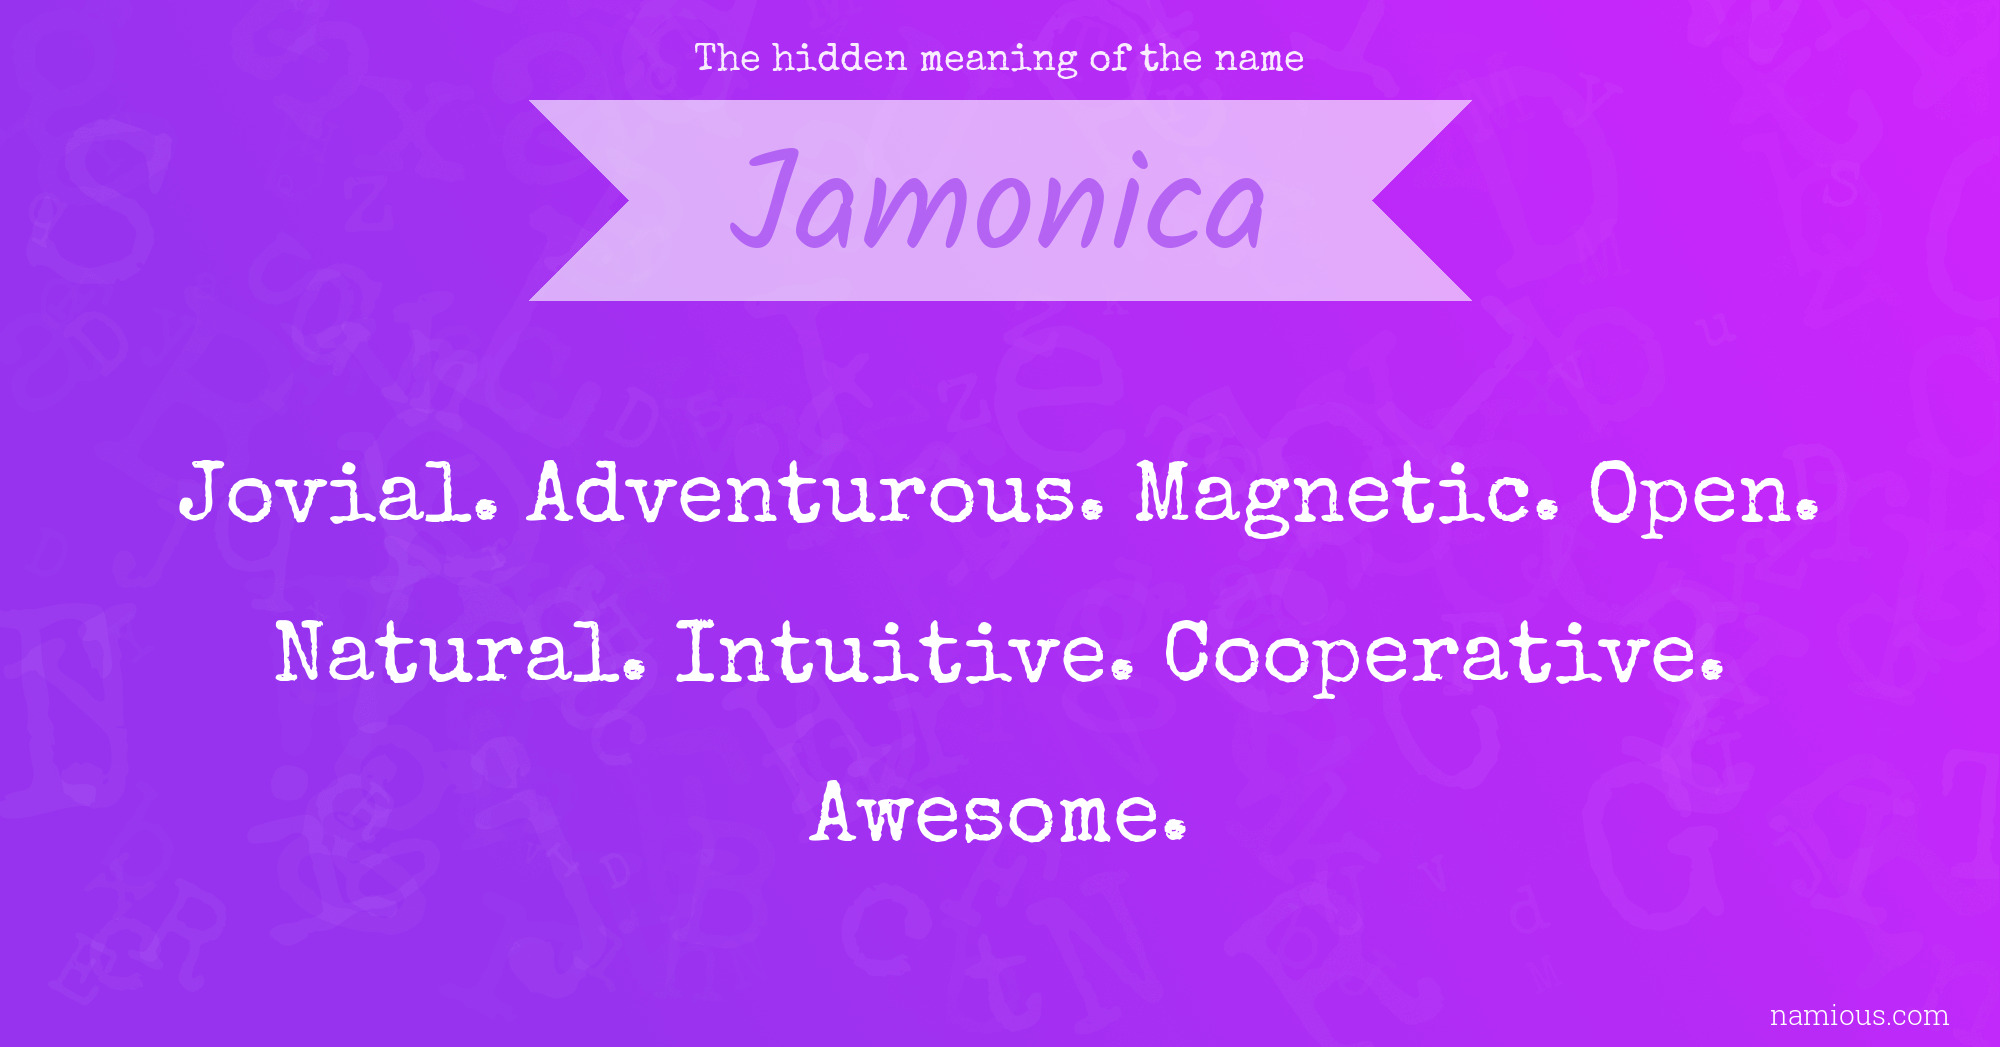 The hidden meaning of the name Jamonica